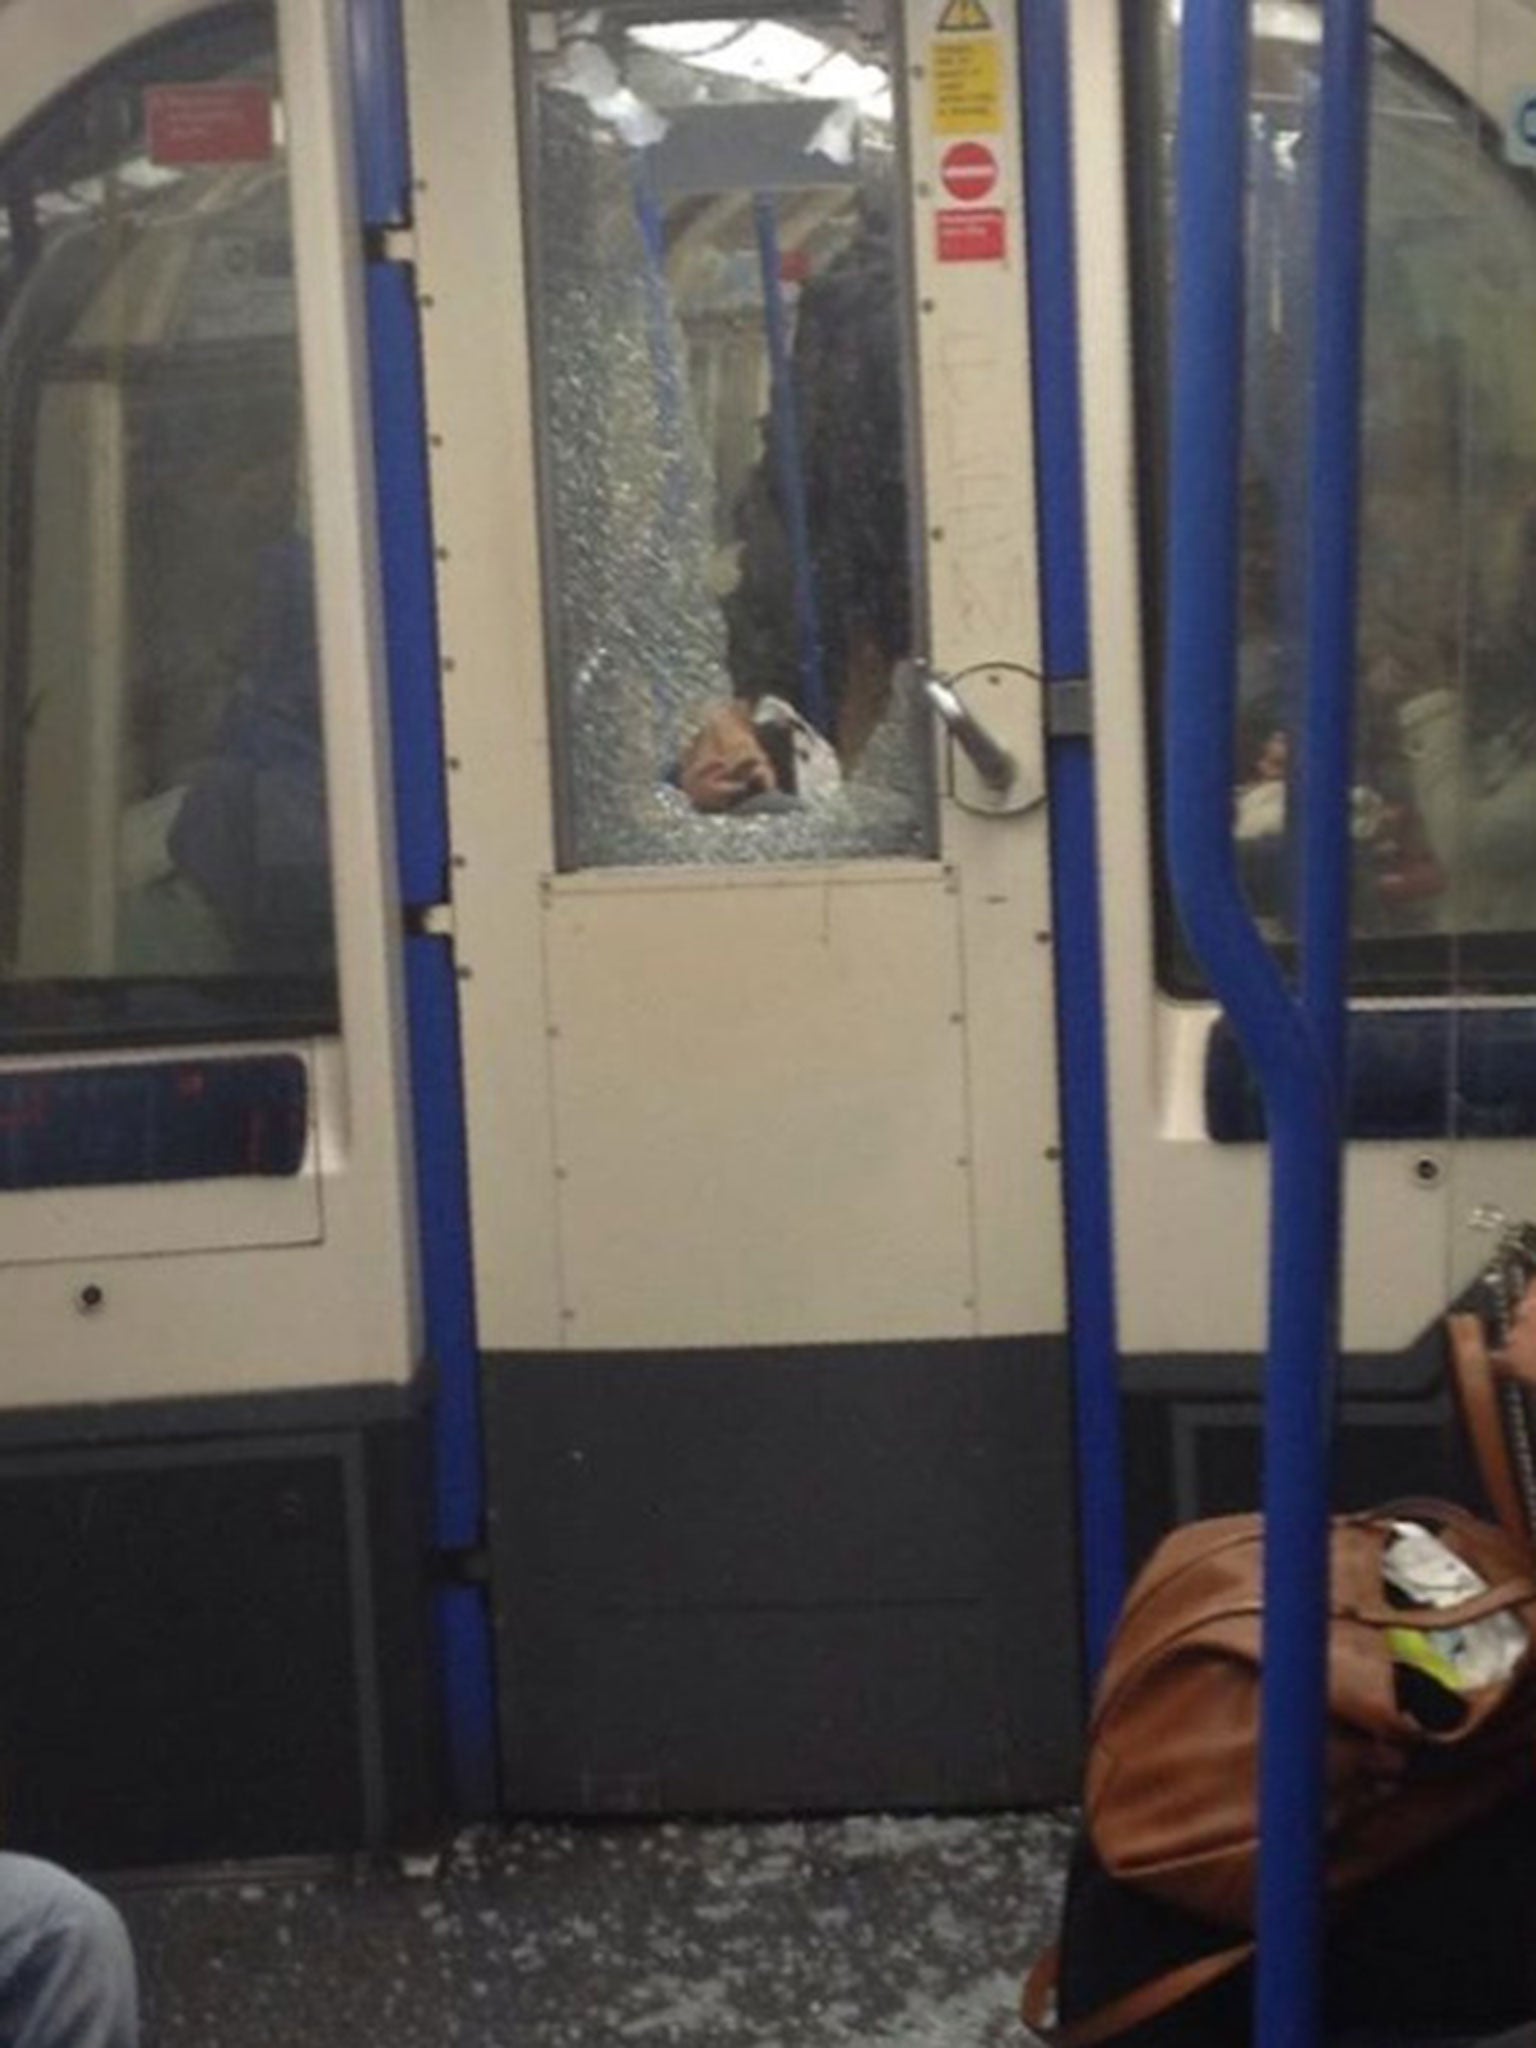 Passenger Sarah Whiteman took a picture of the window, in a door between carriages, showing it broken and shattered